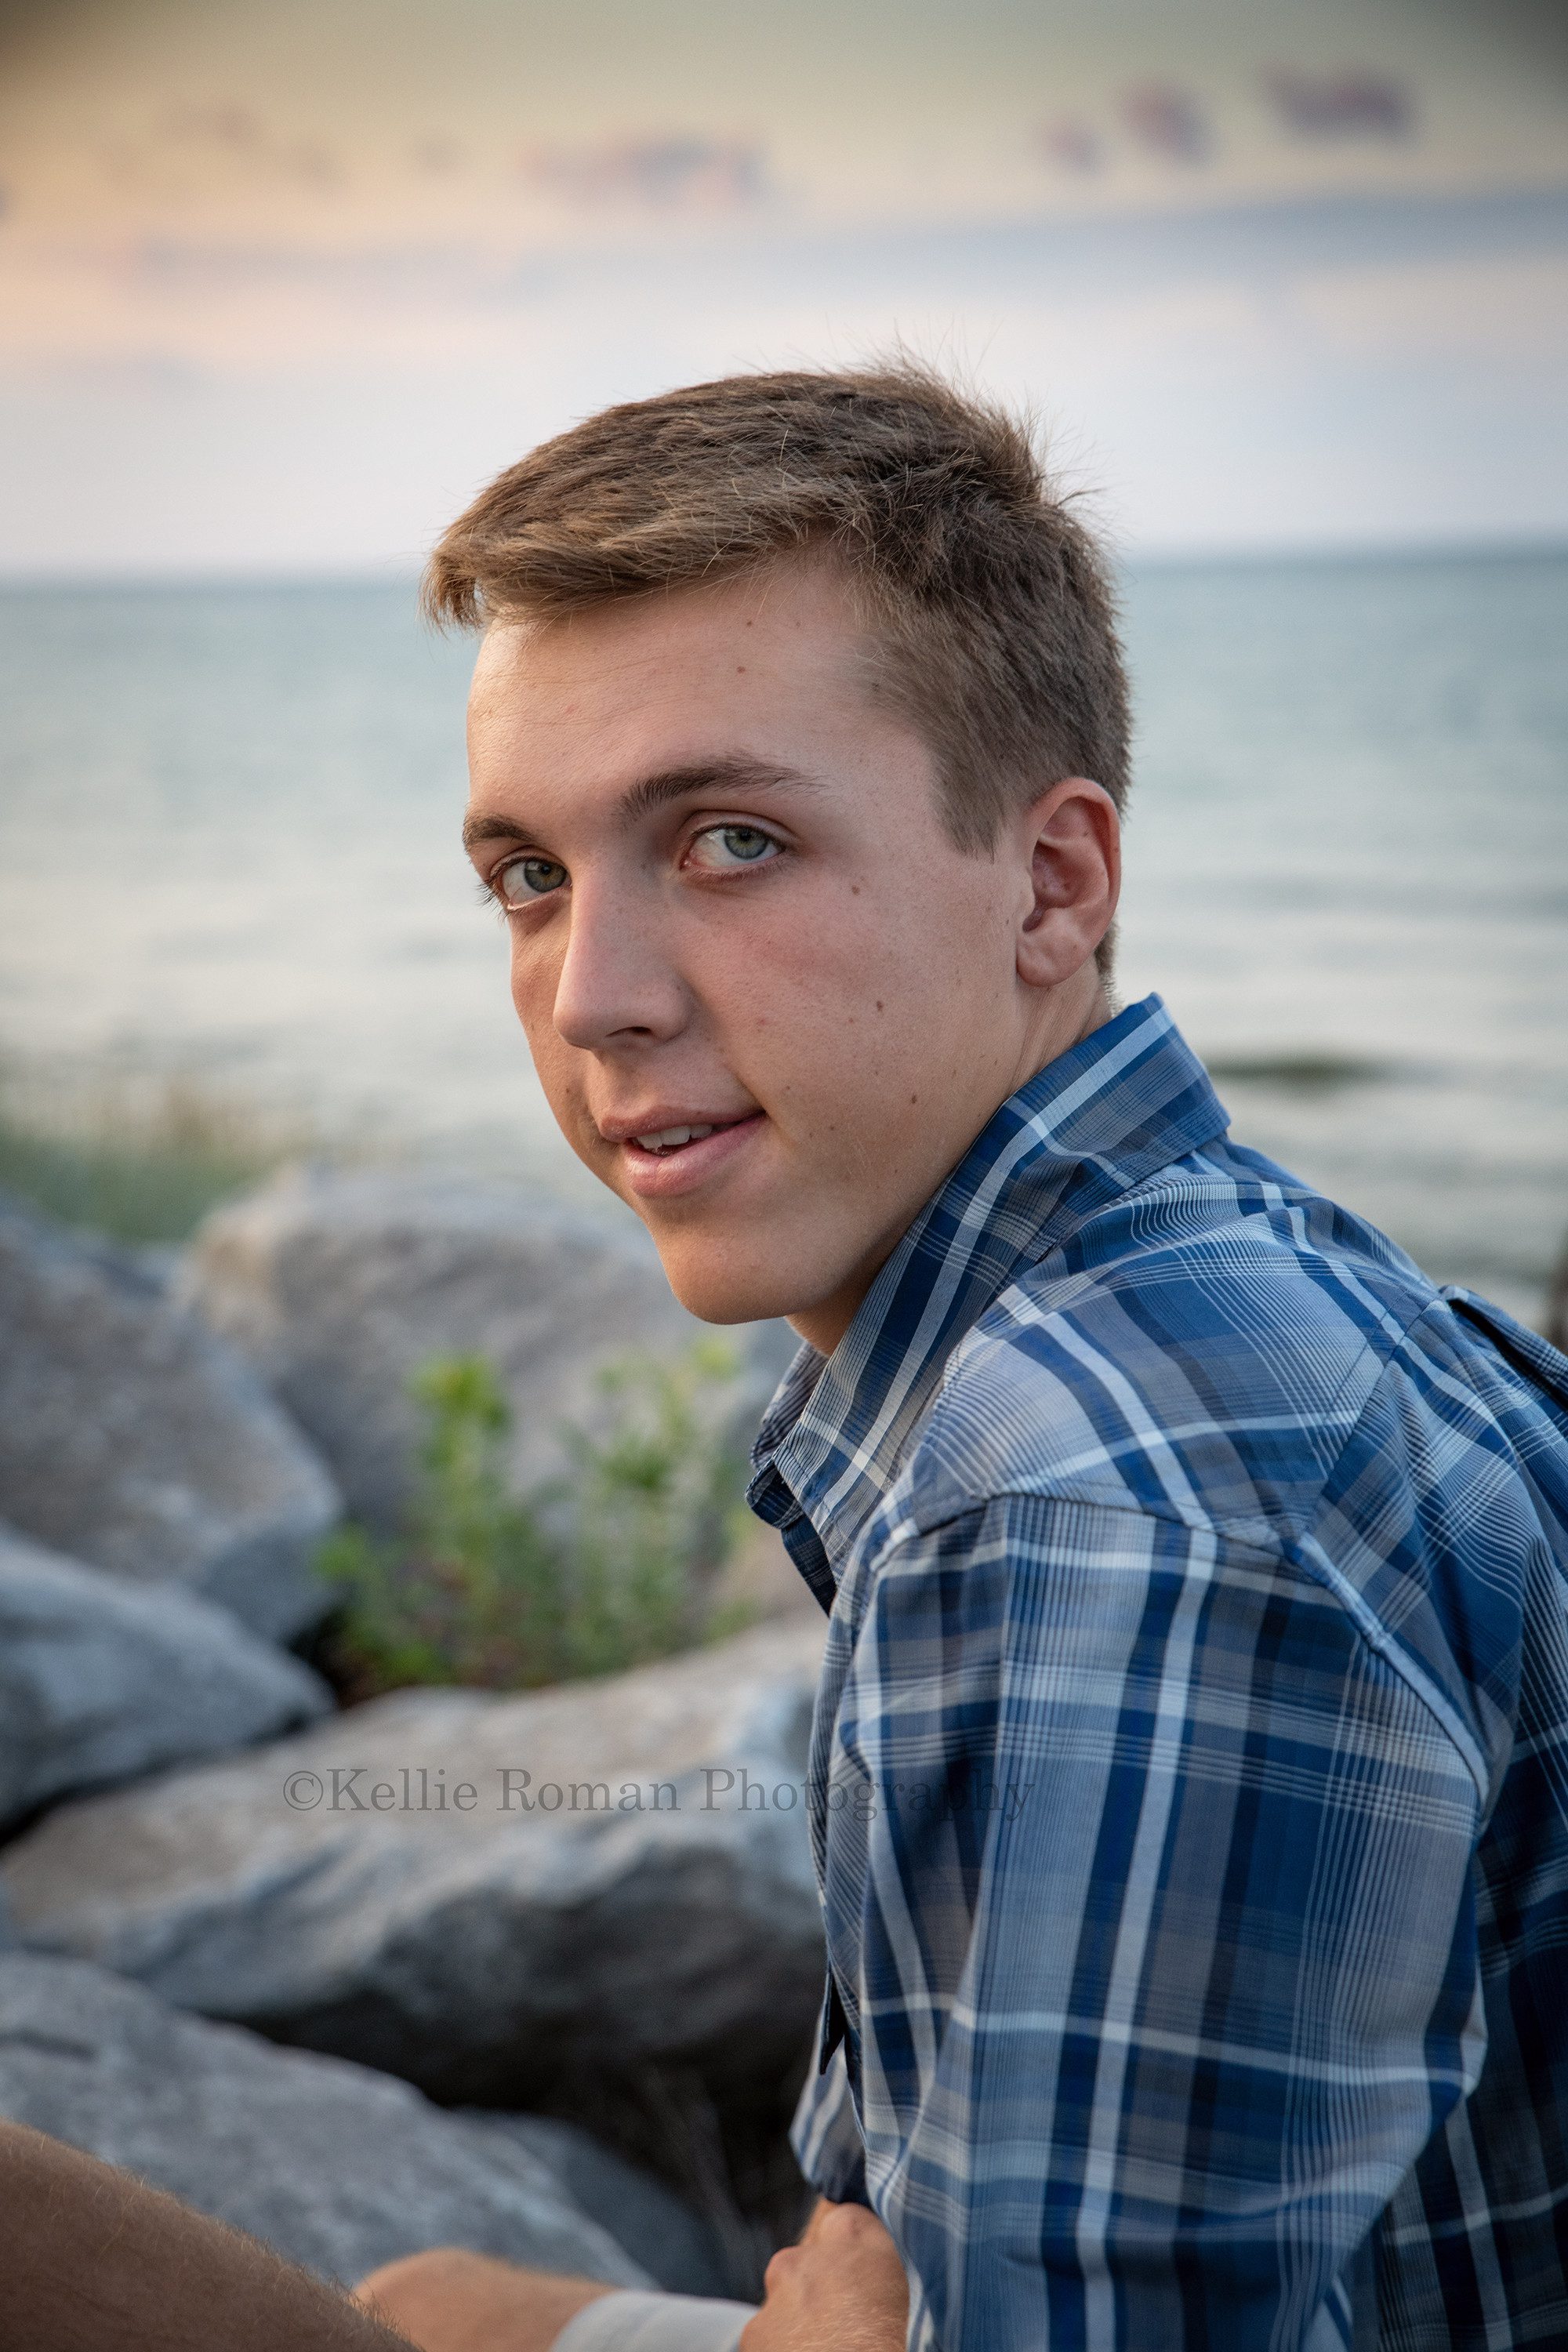 oak creek senior student in milwaukee county park sitting on large rocks in front of Lake Michigan he is looking at the camera while wearing a blue plaid shirt the sky is pastel behind him